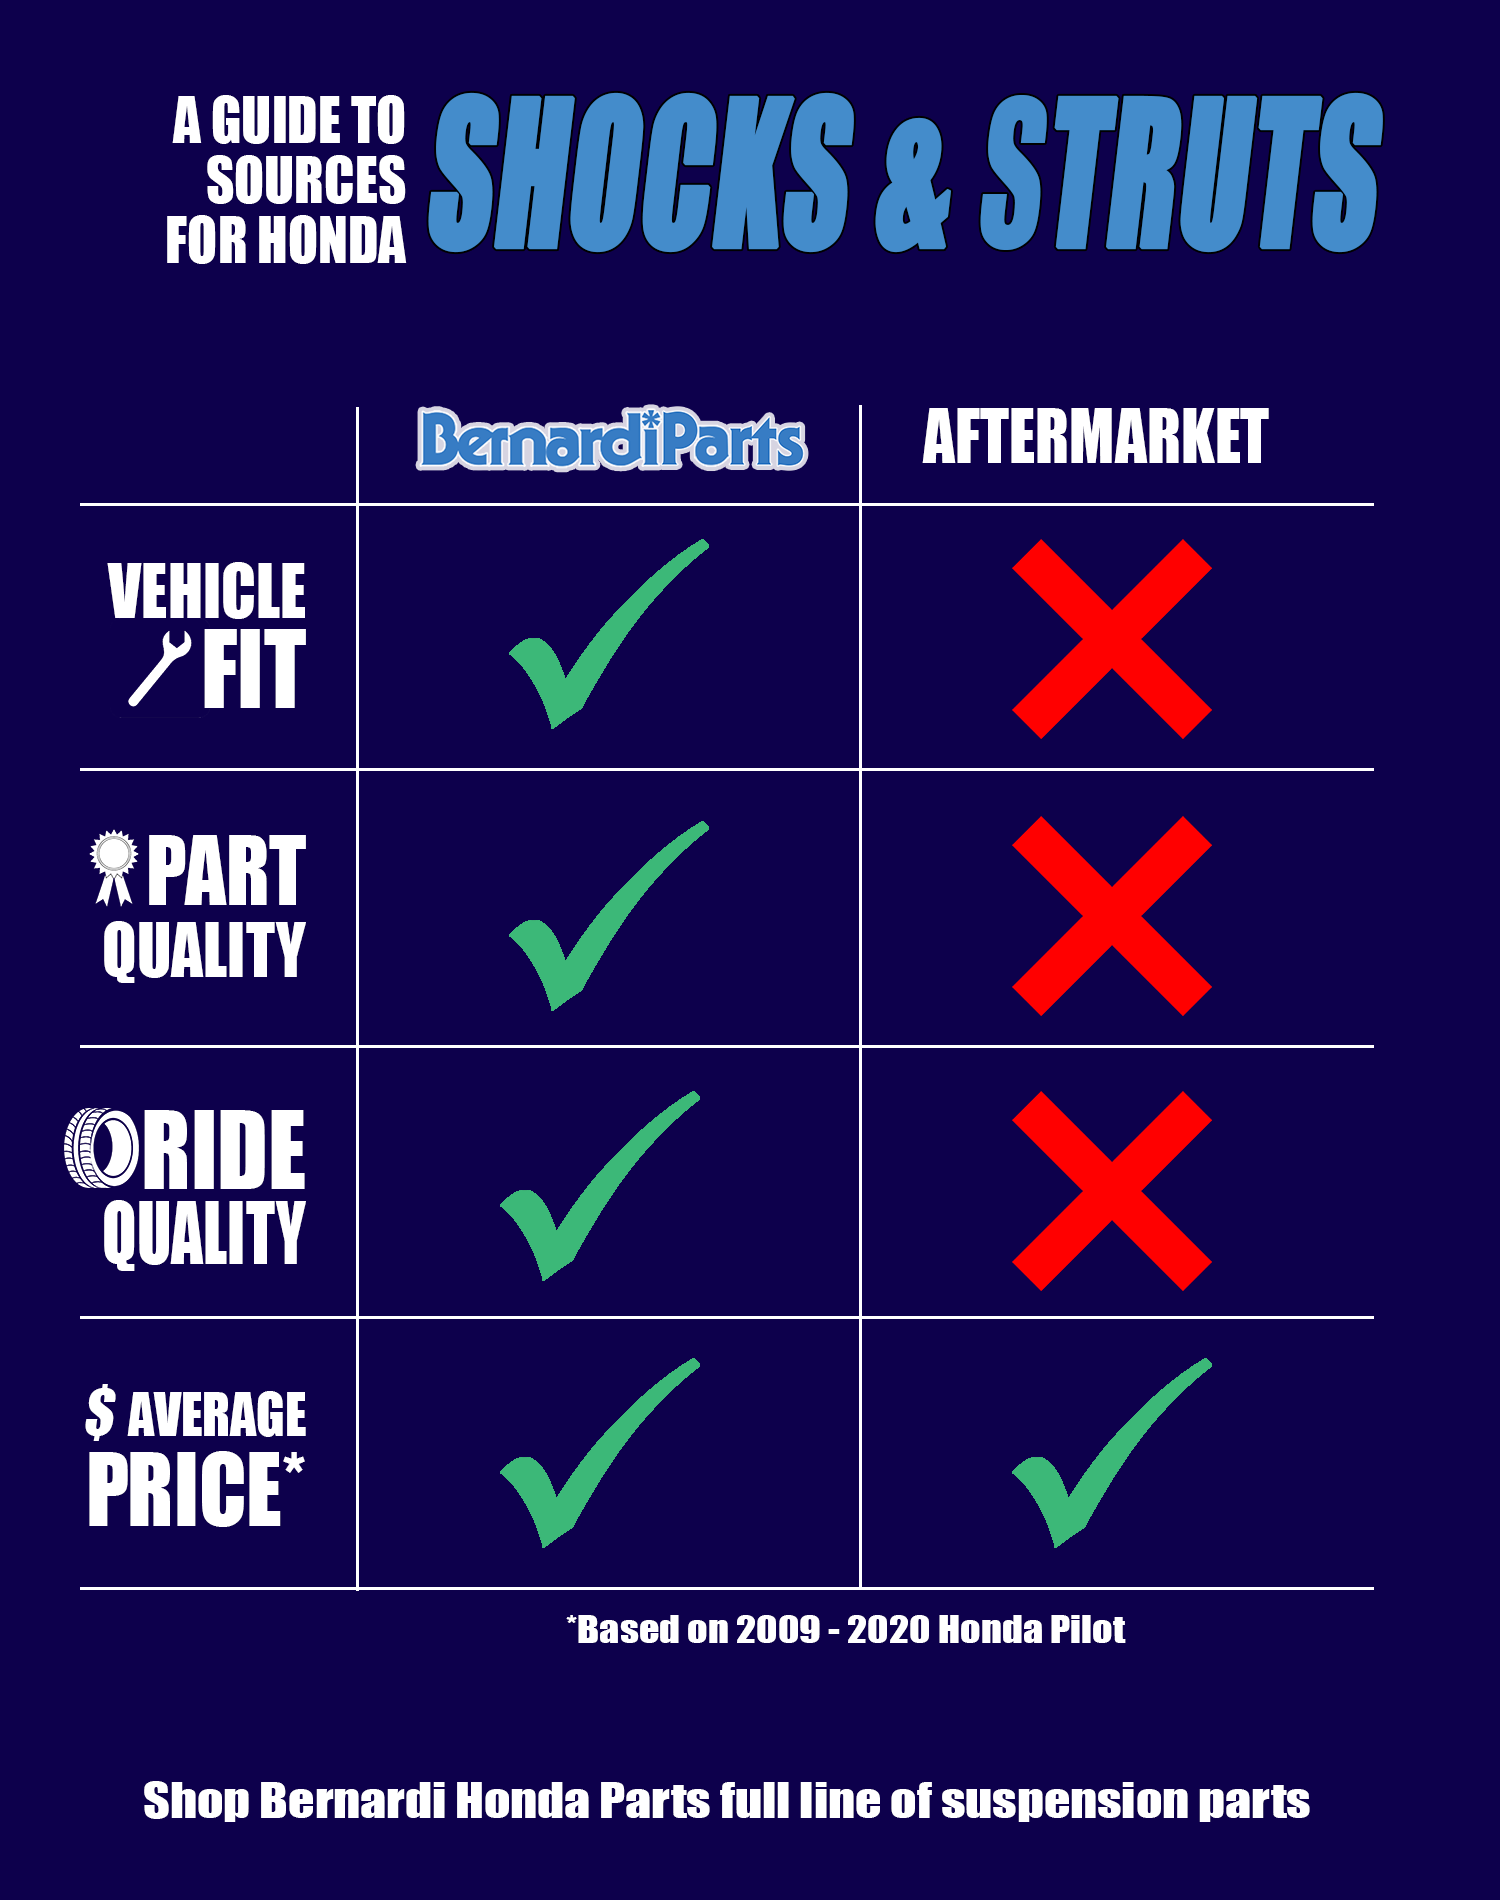 A guide to sources for Honda shocks and struts.